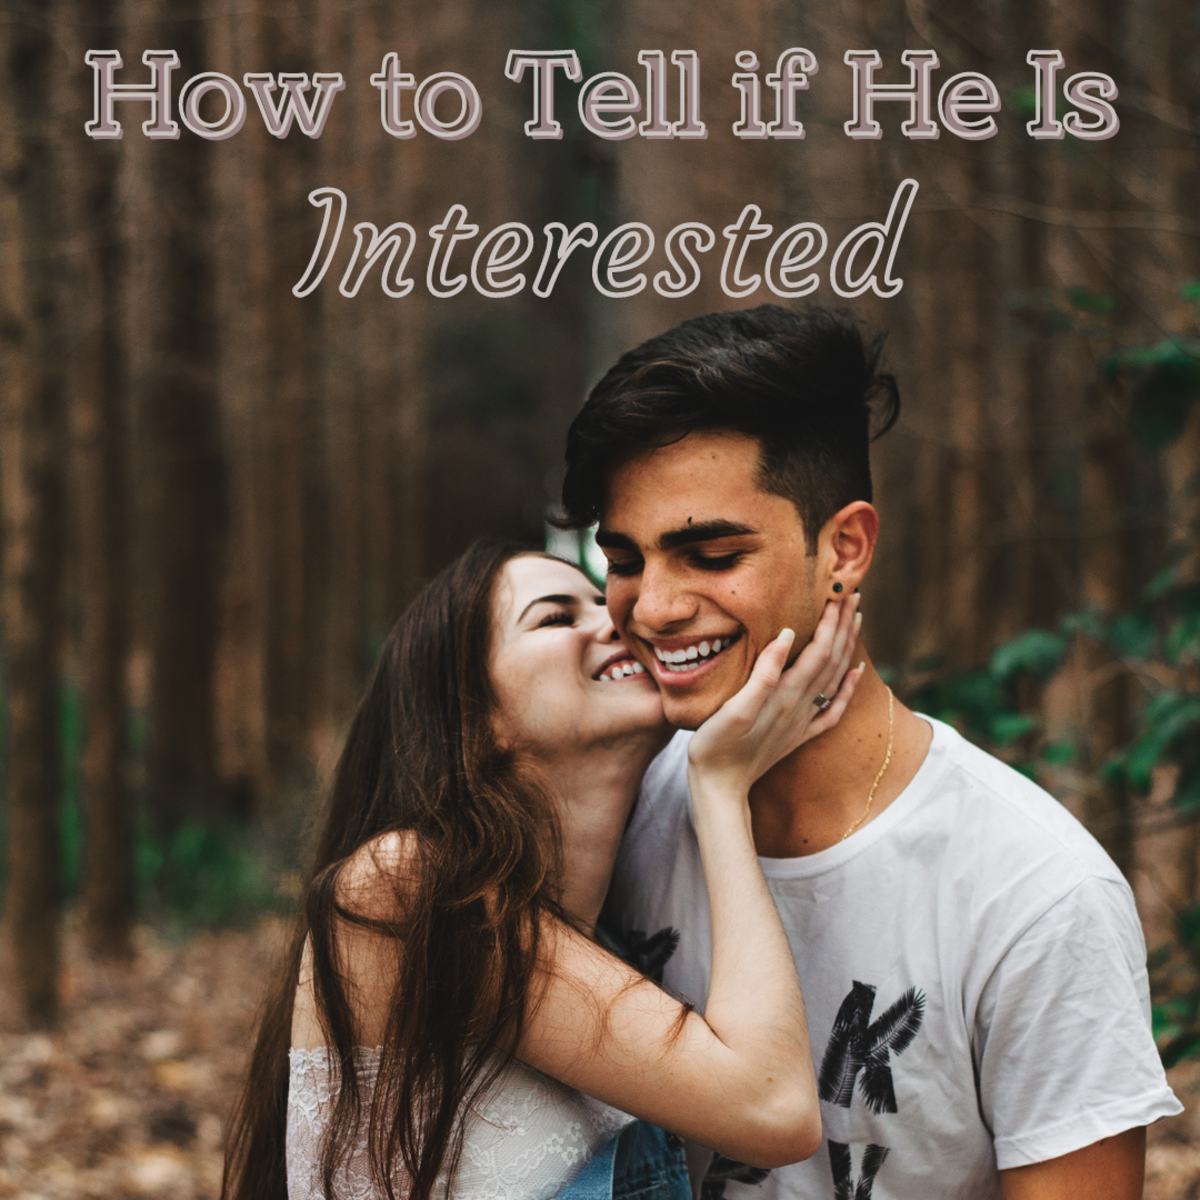 Is he interested in you? Find out here!